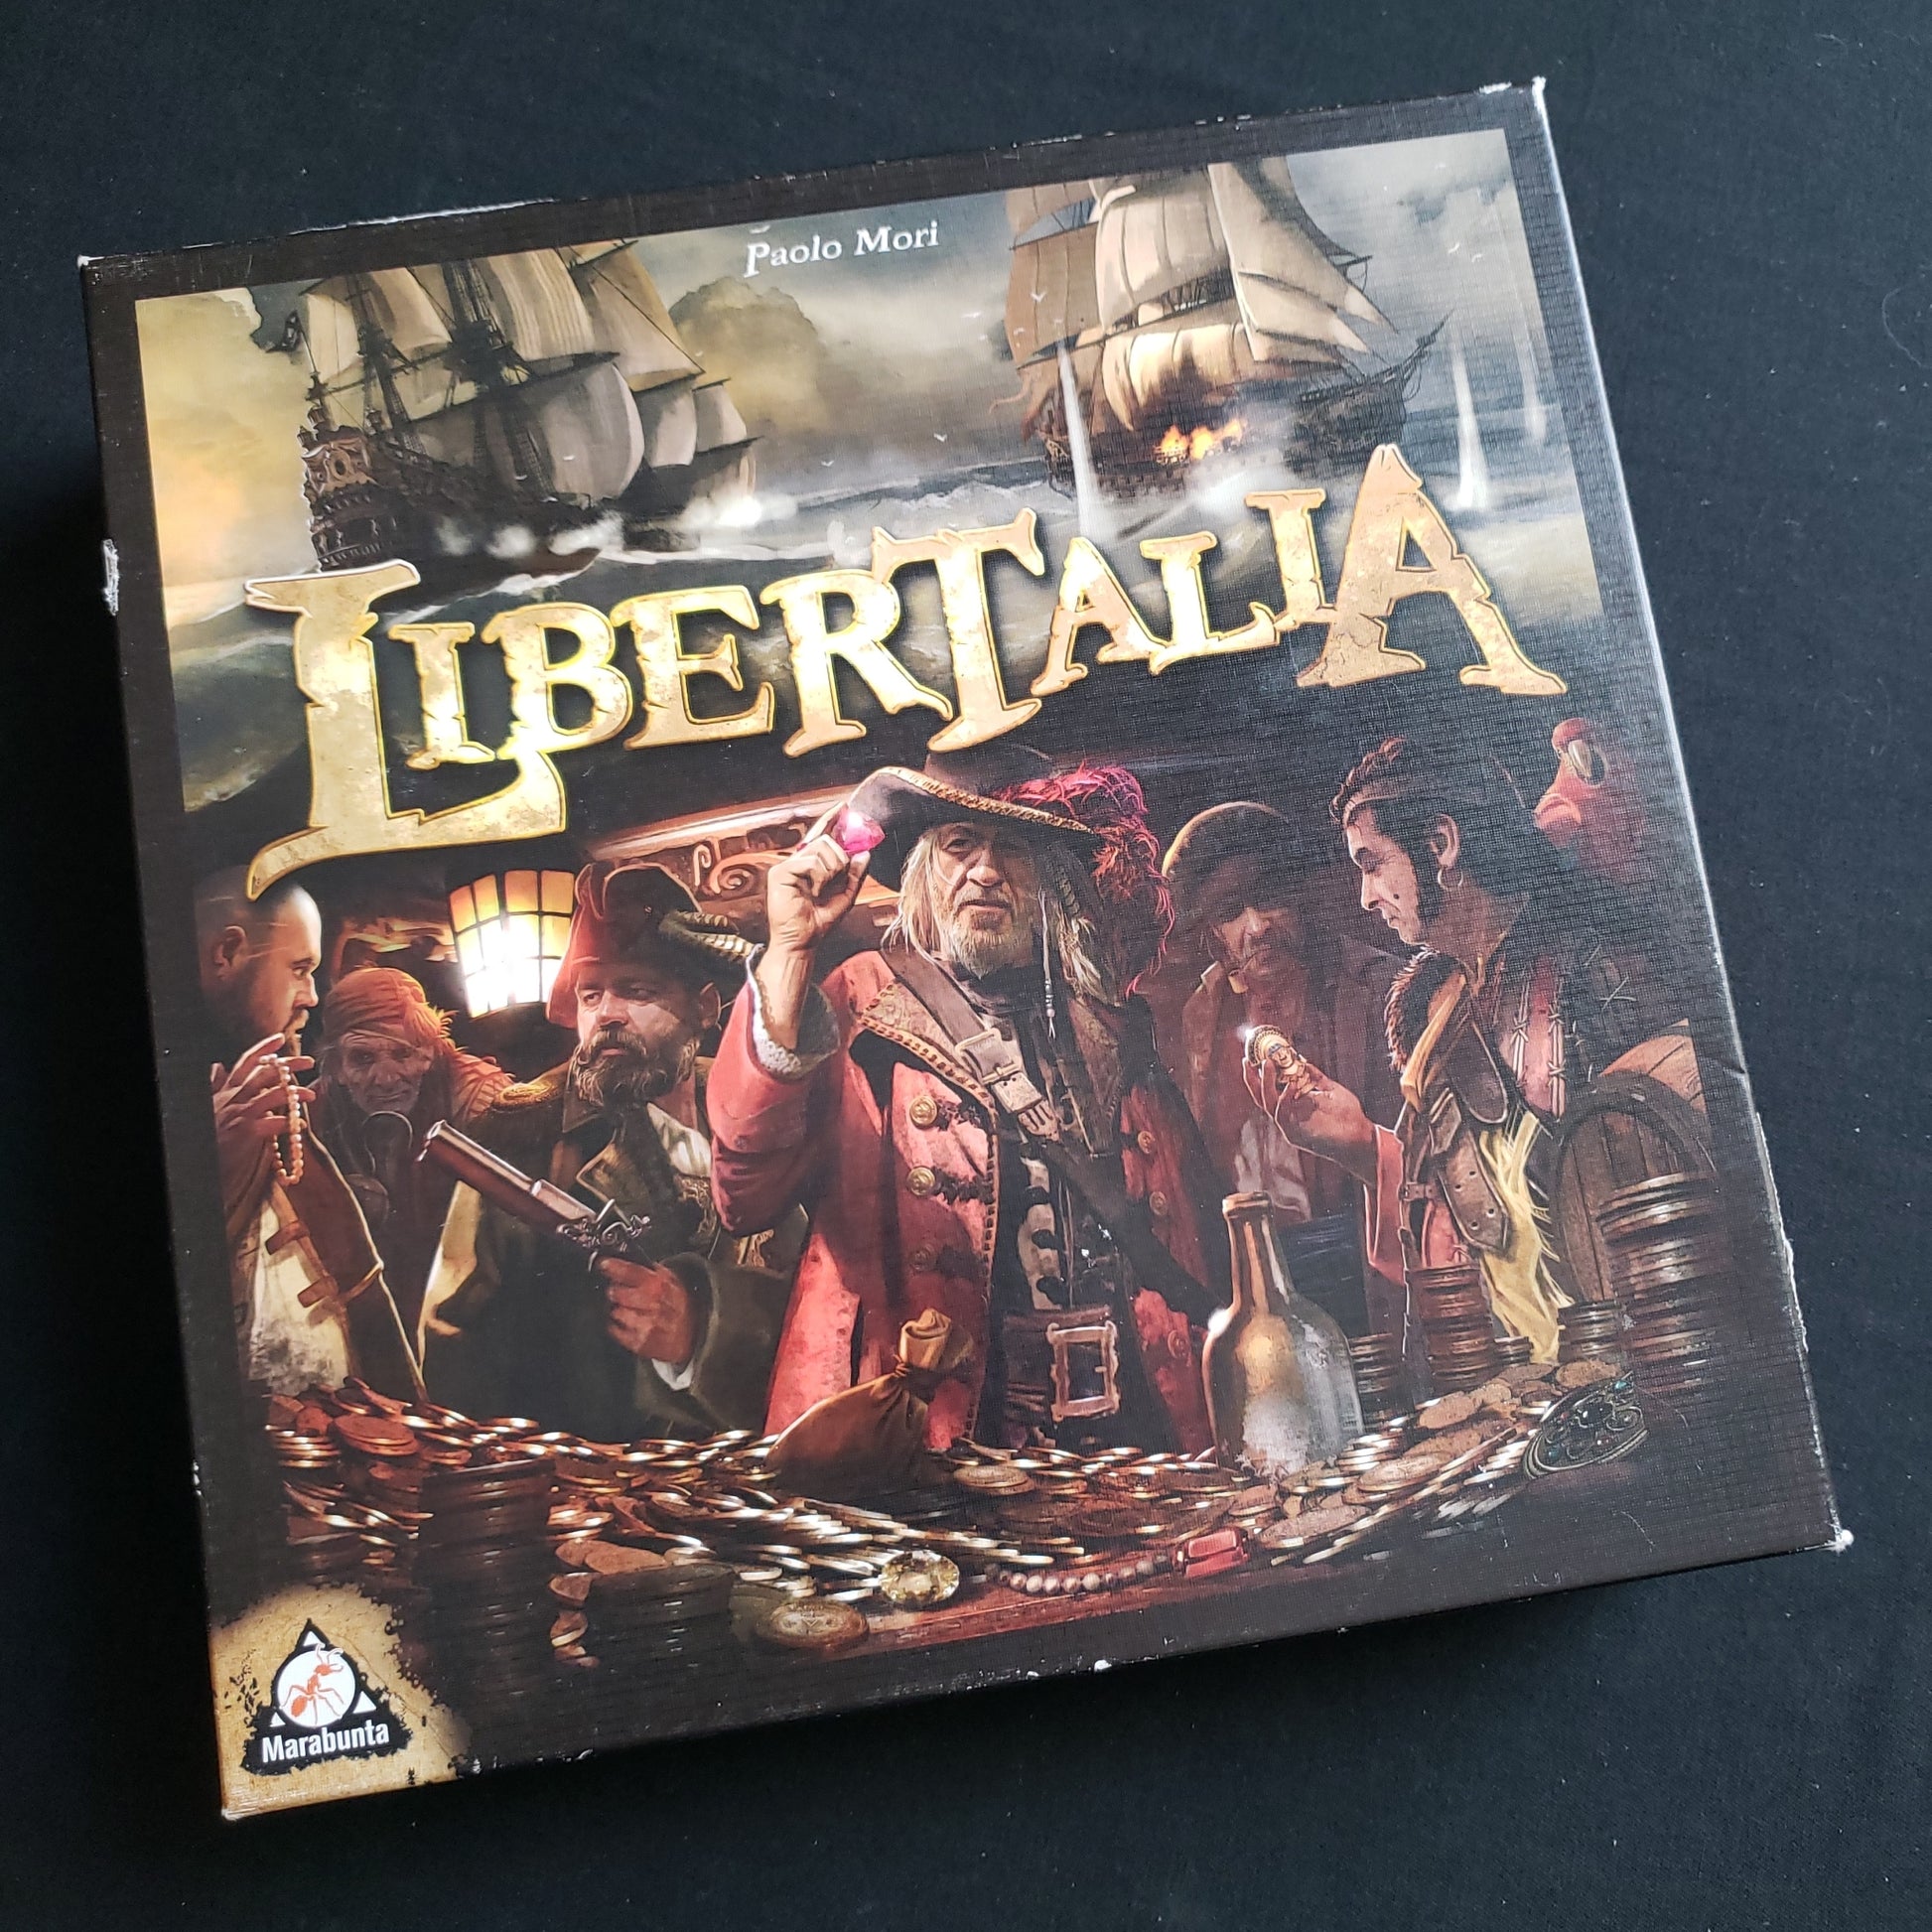 Image shows the front cover of the box of the Libertalia board game